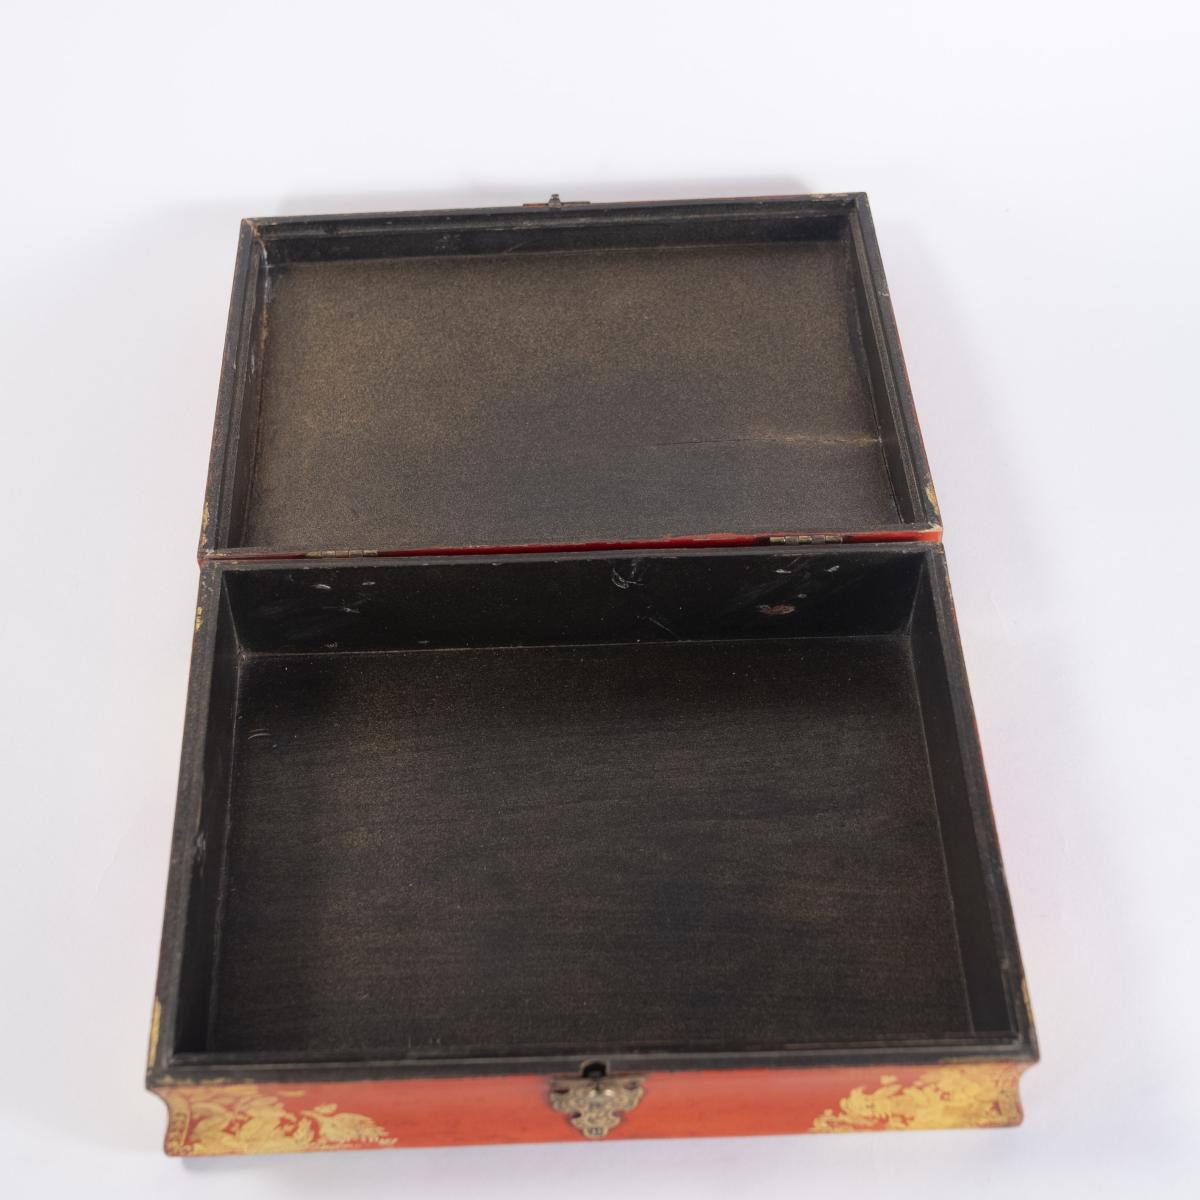 Early 18 century red lacquered bath box circa 1720 to 1750